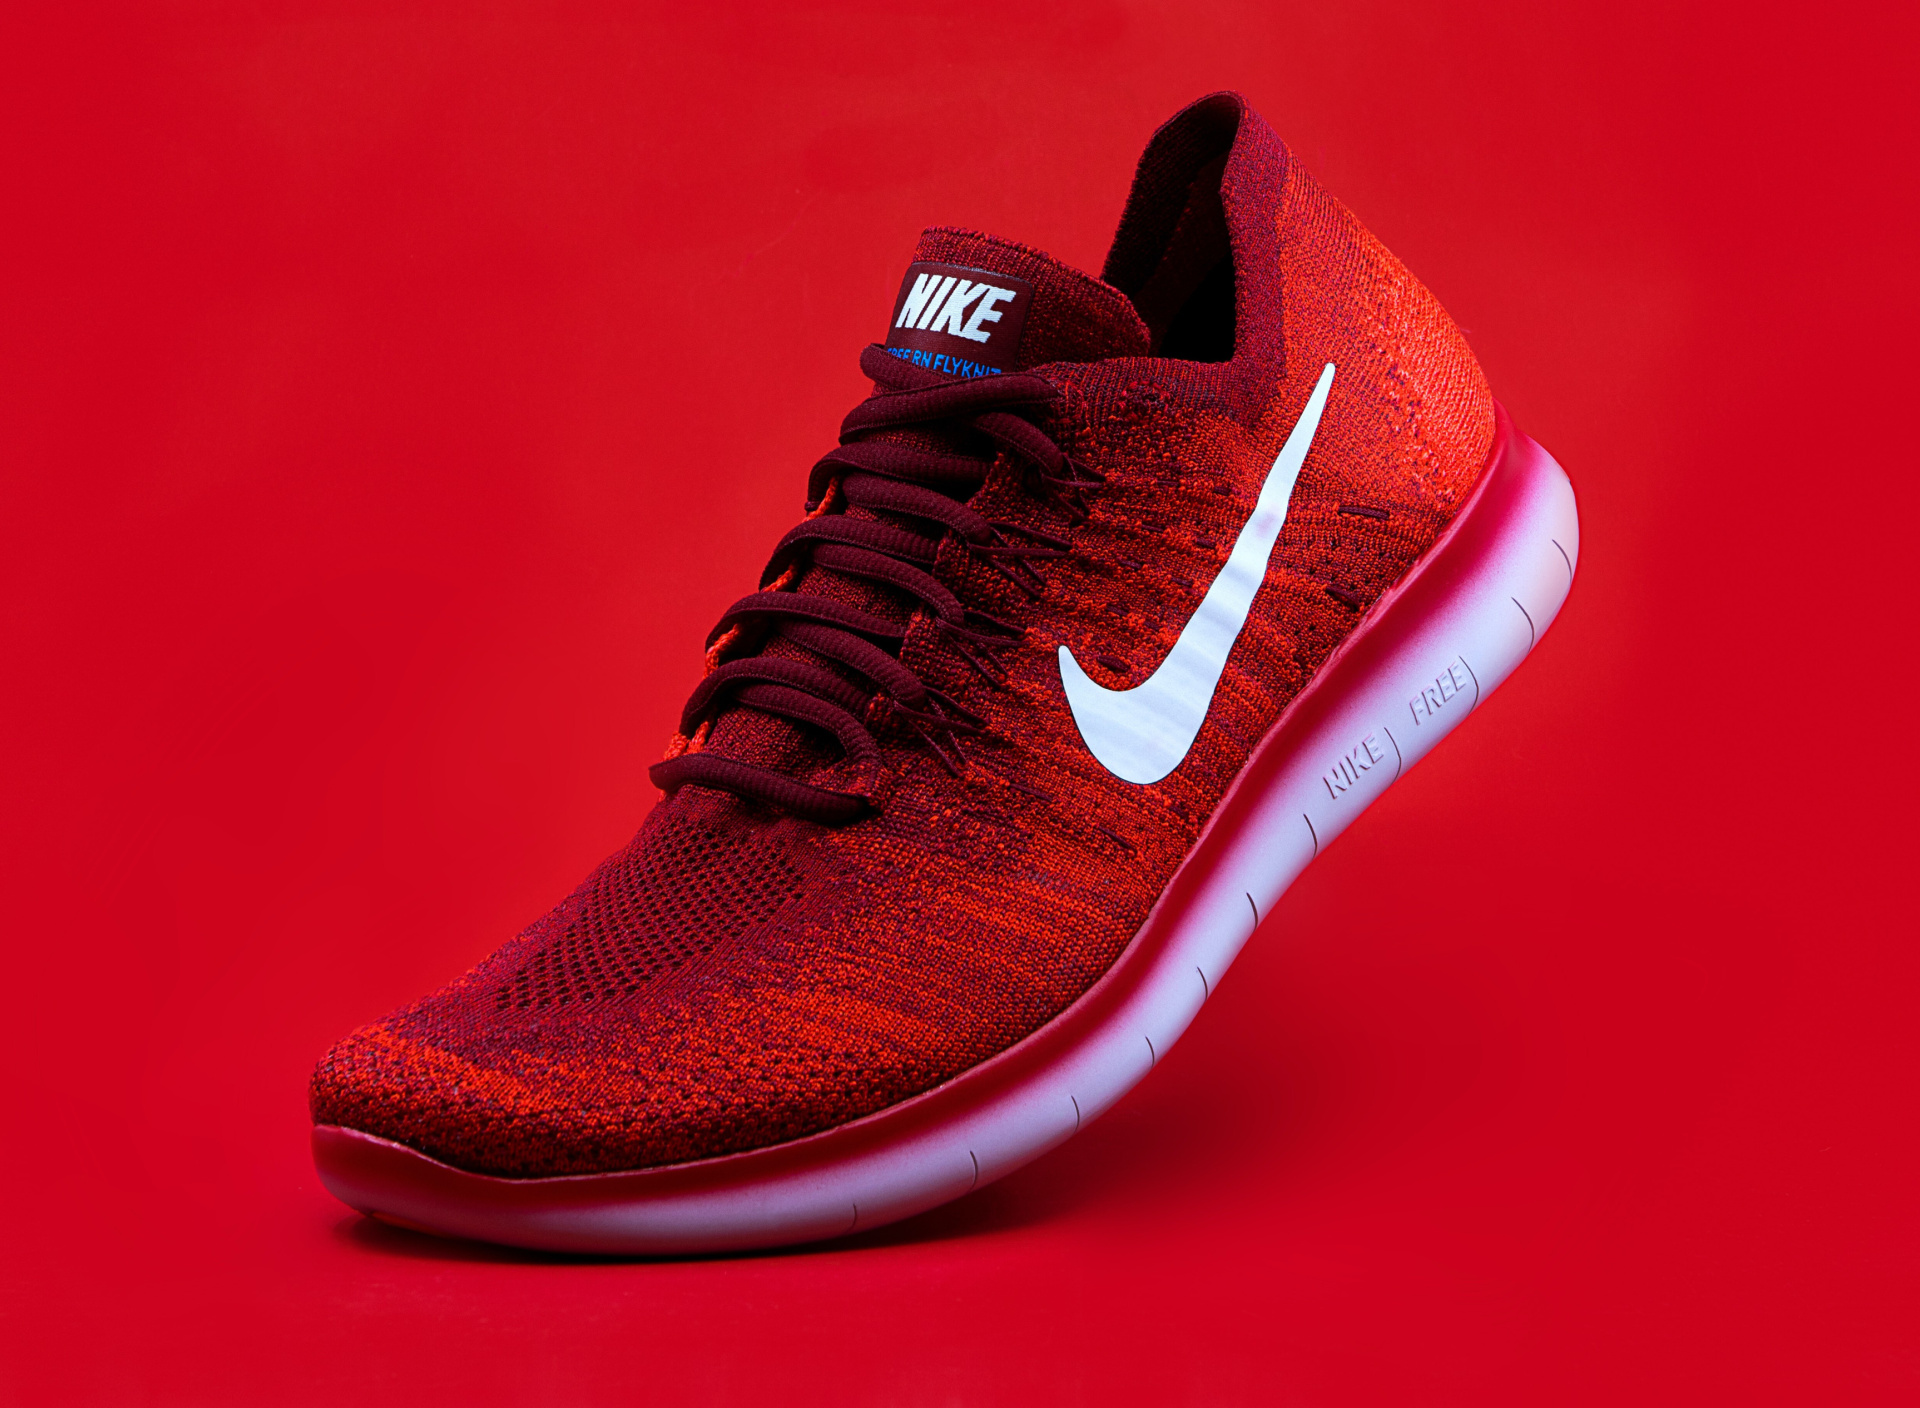 Red Nike Shoes wallpaper 1920x1408